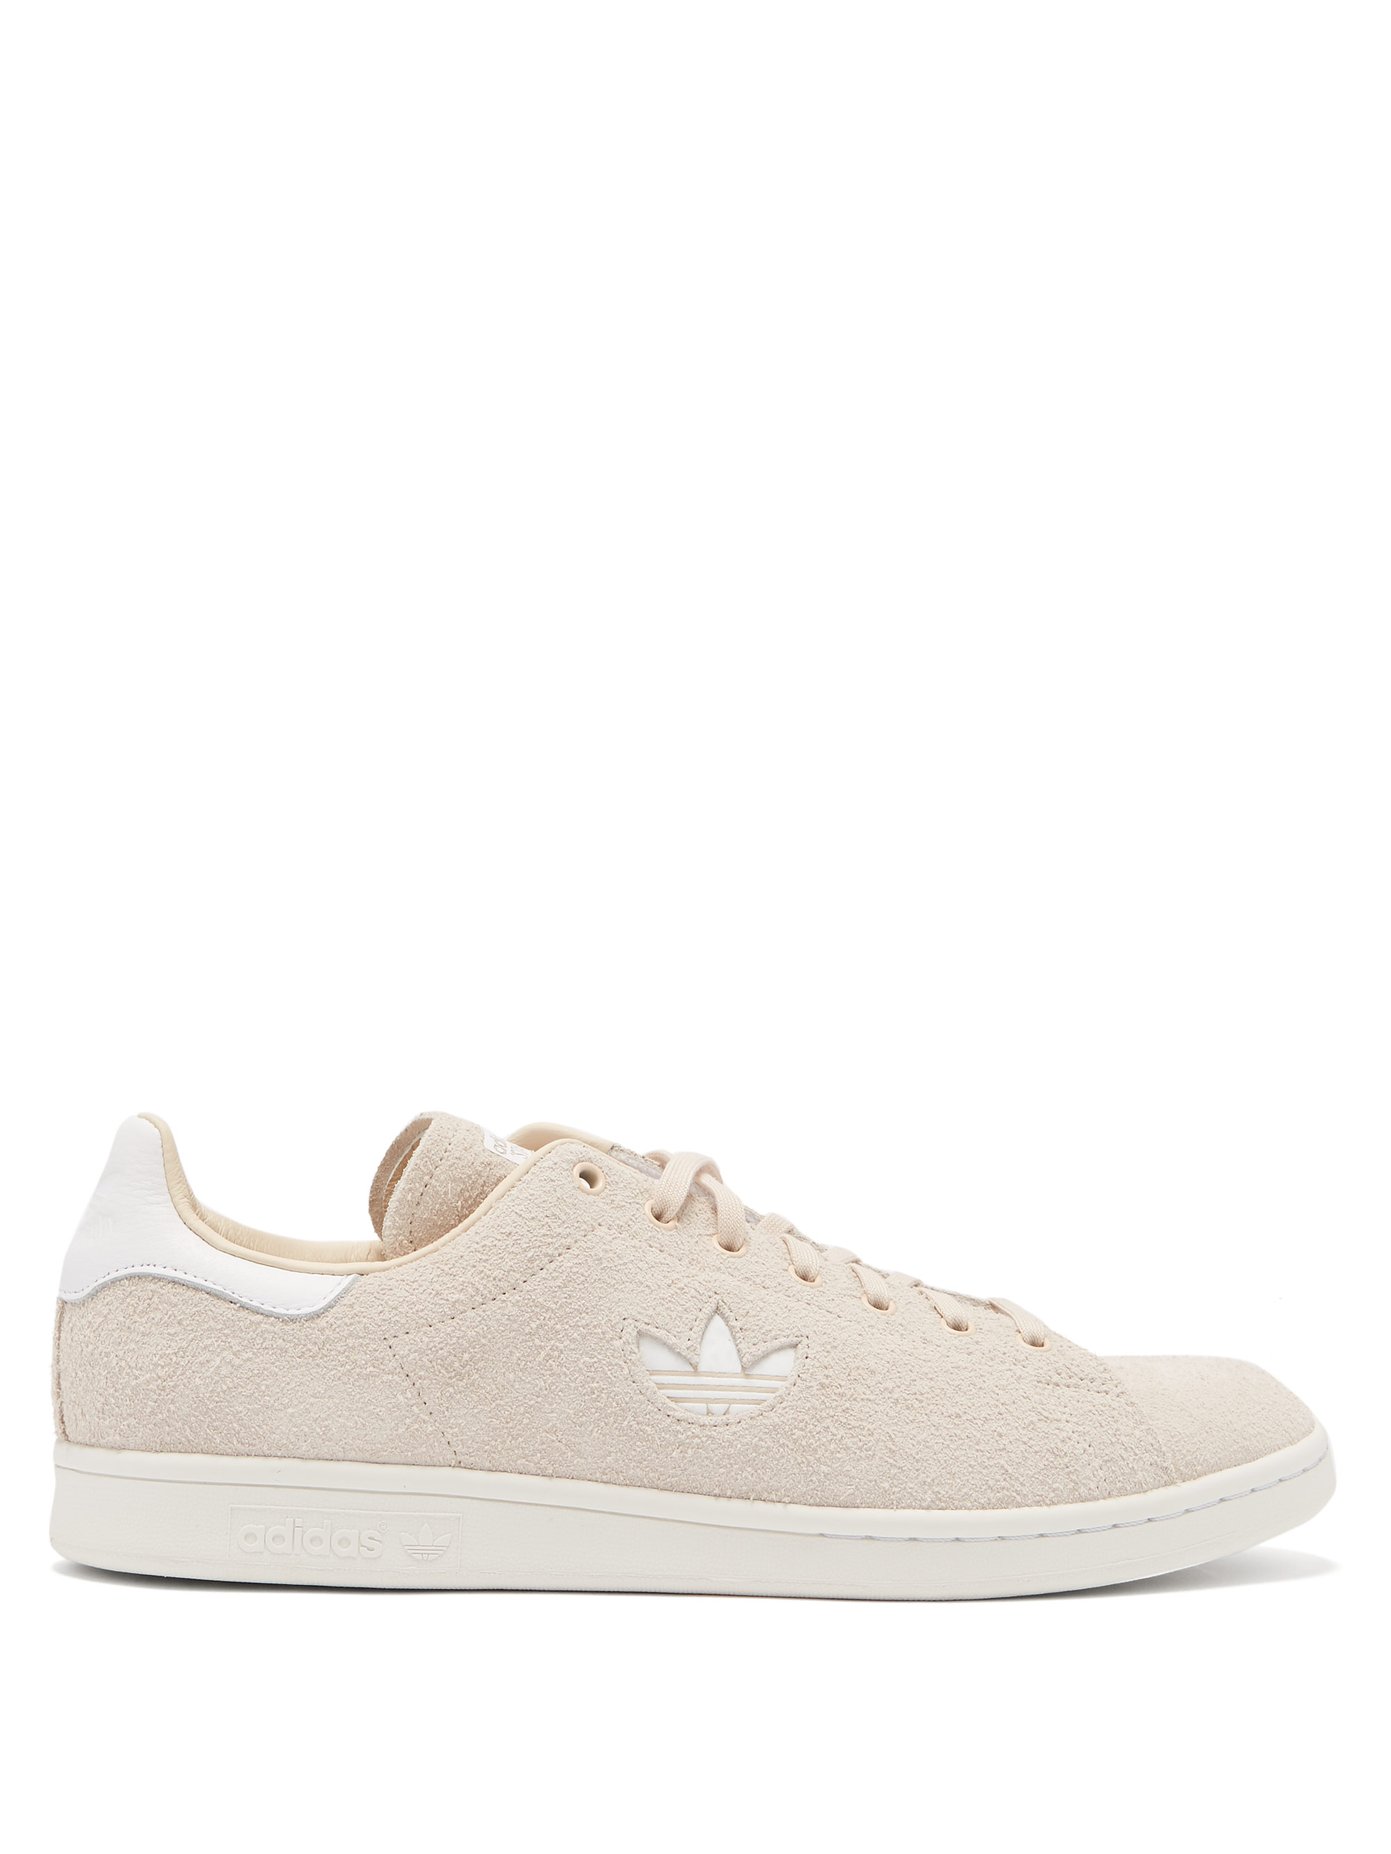 adidas tan suede trainers